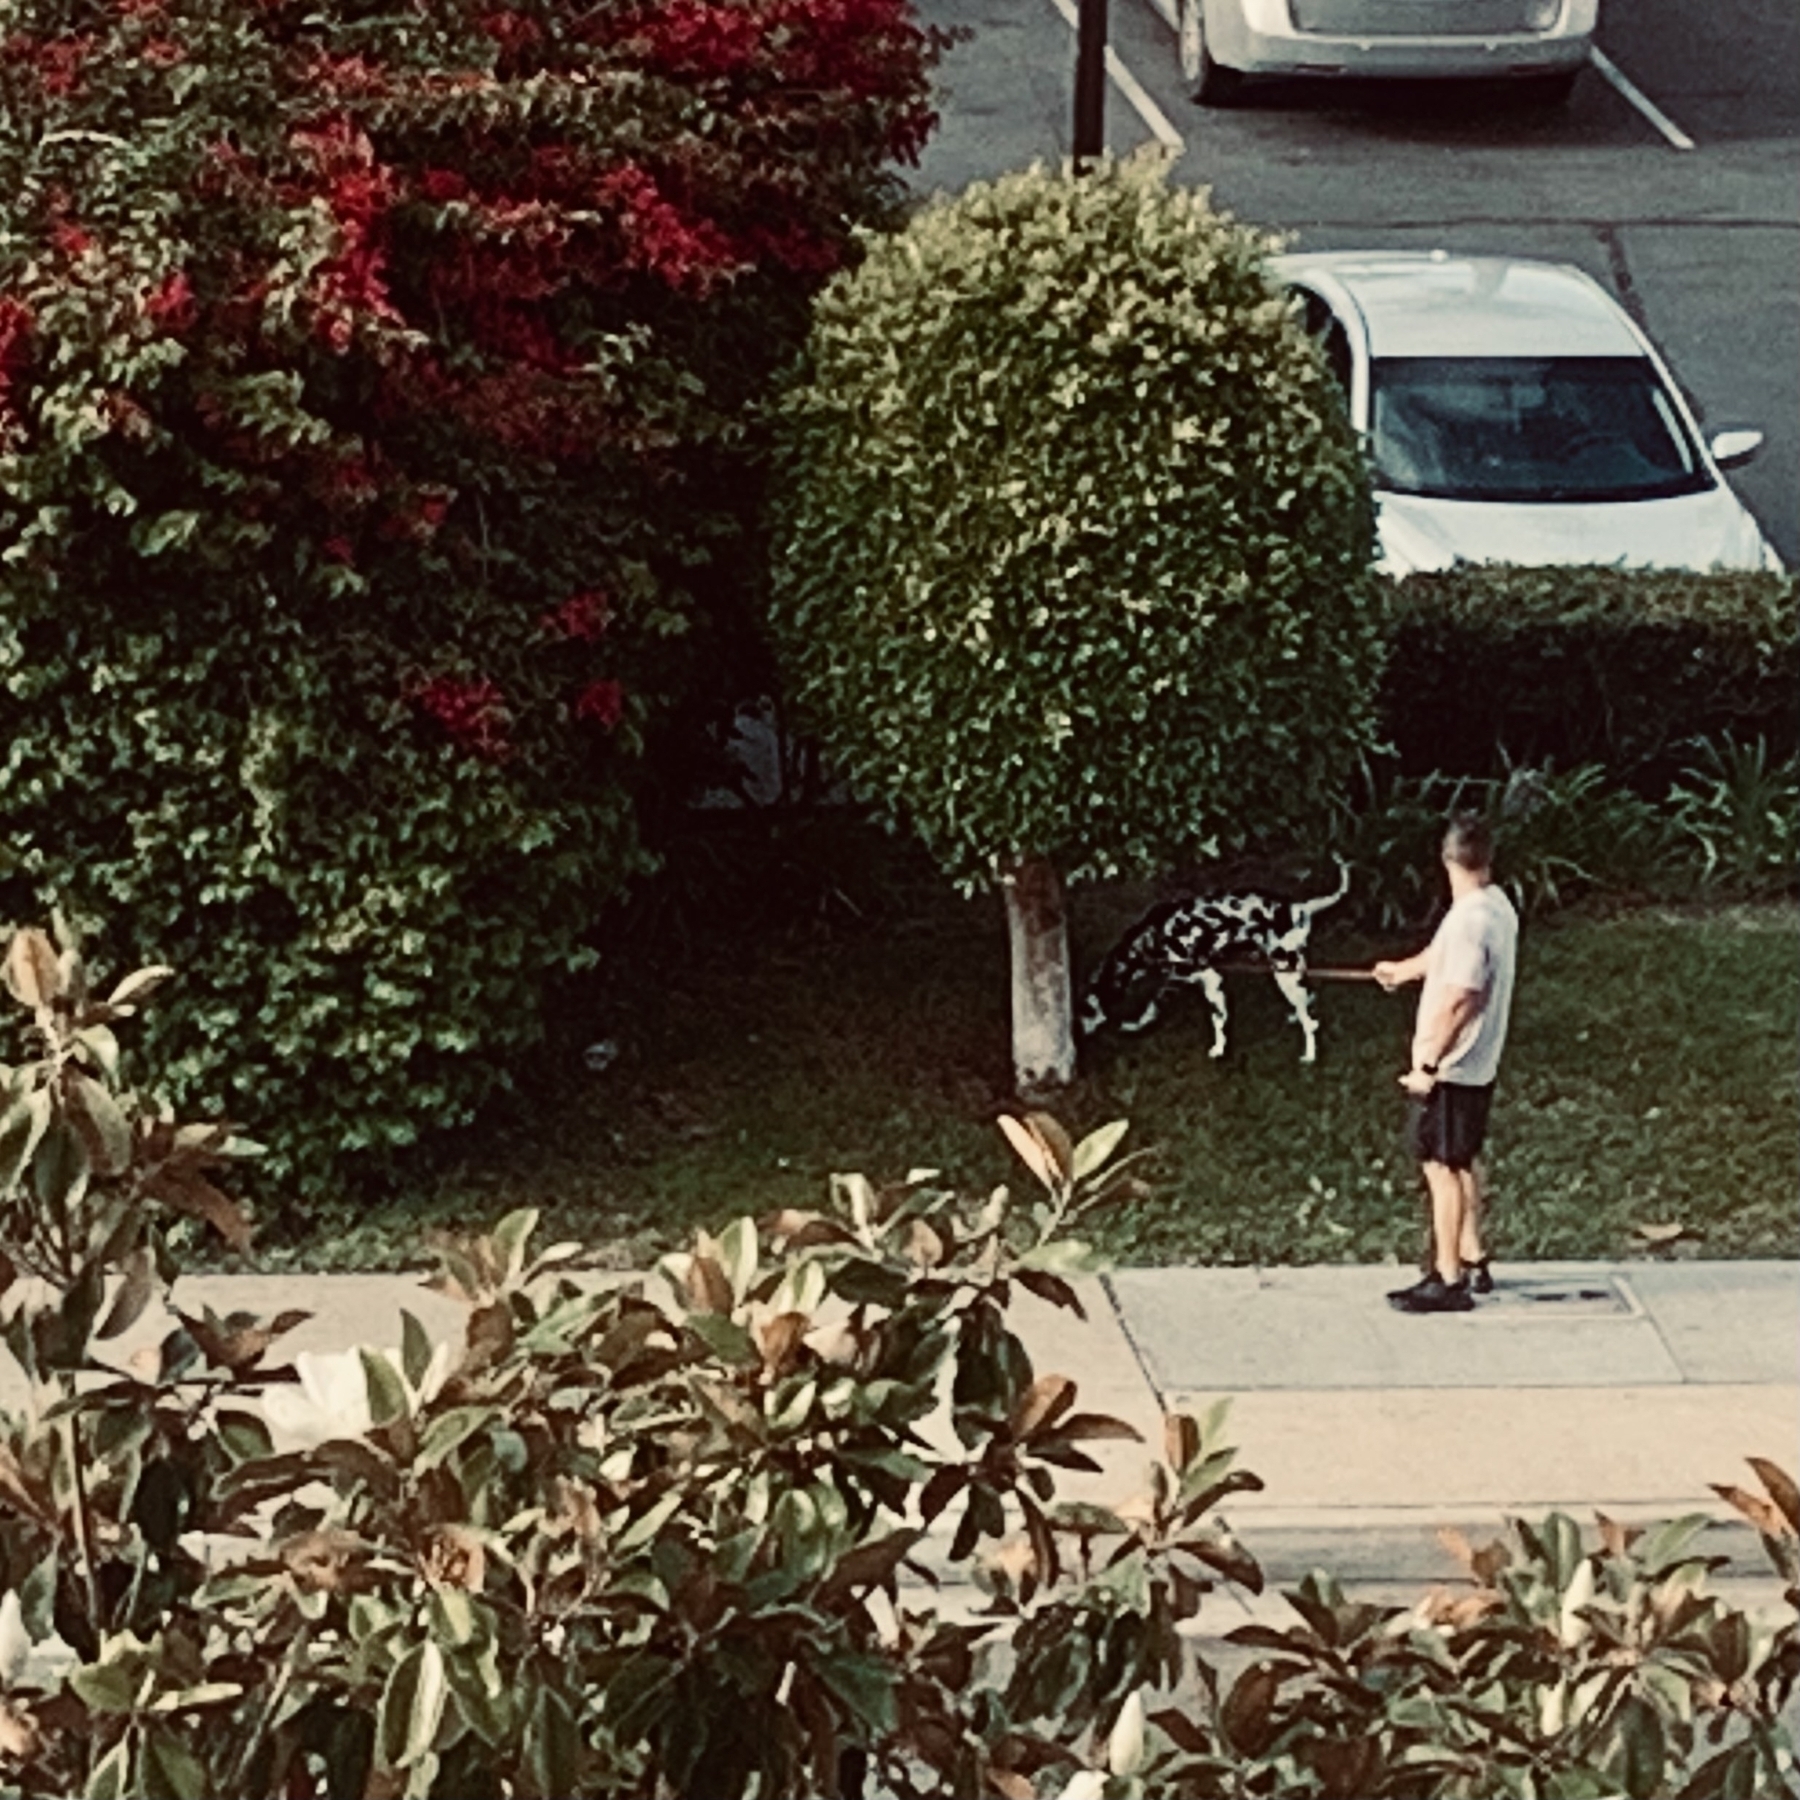 Amidst lush Southern California greenery, a man stands on a sidewalk near some cars with his Dalmatian. The dog is sniffing a tree.